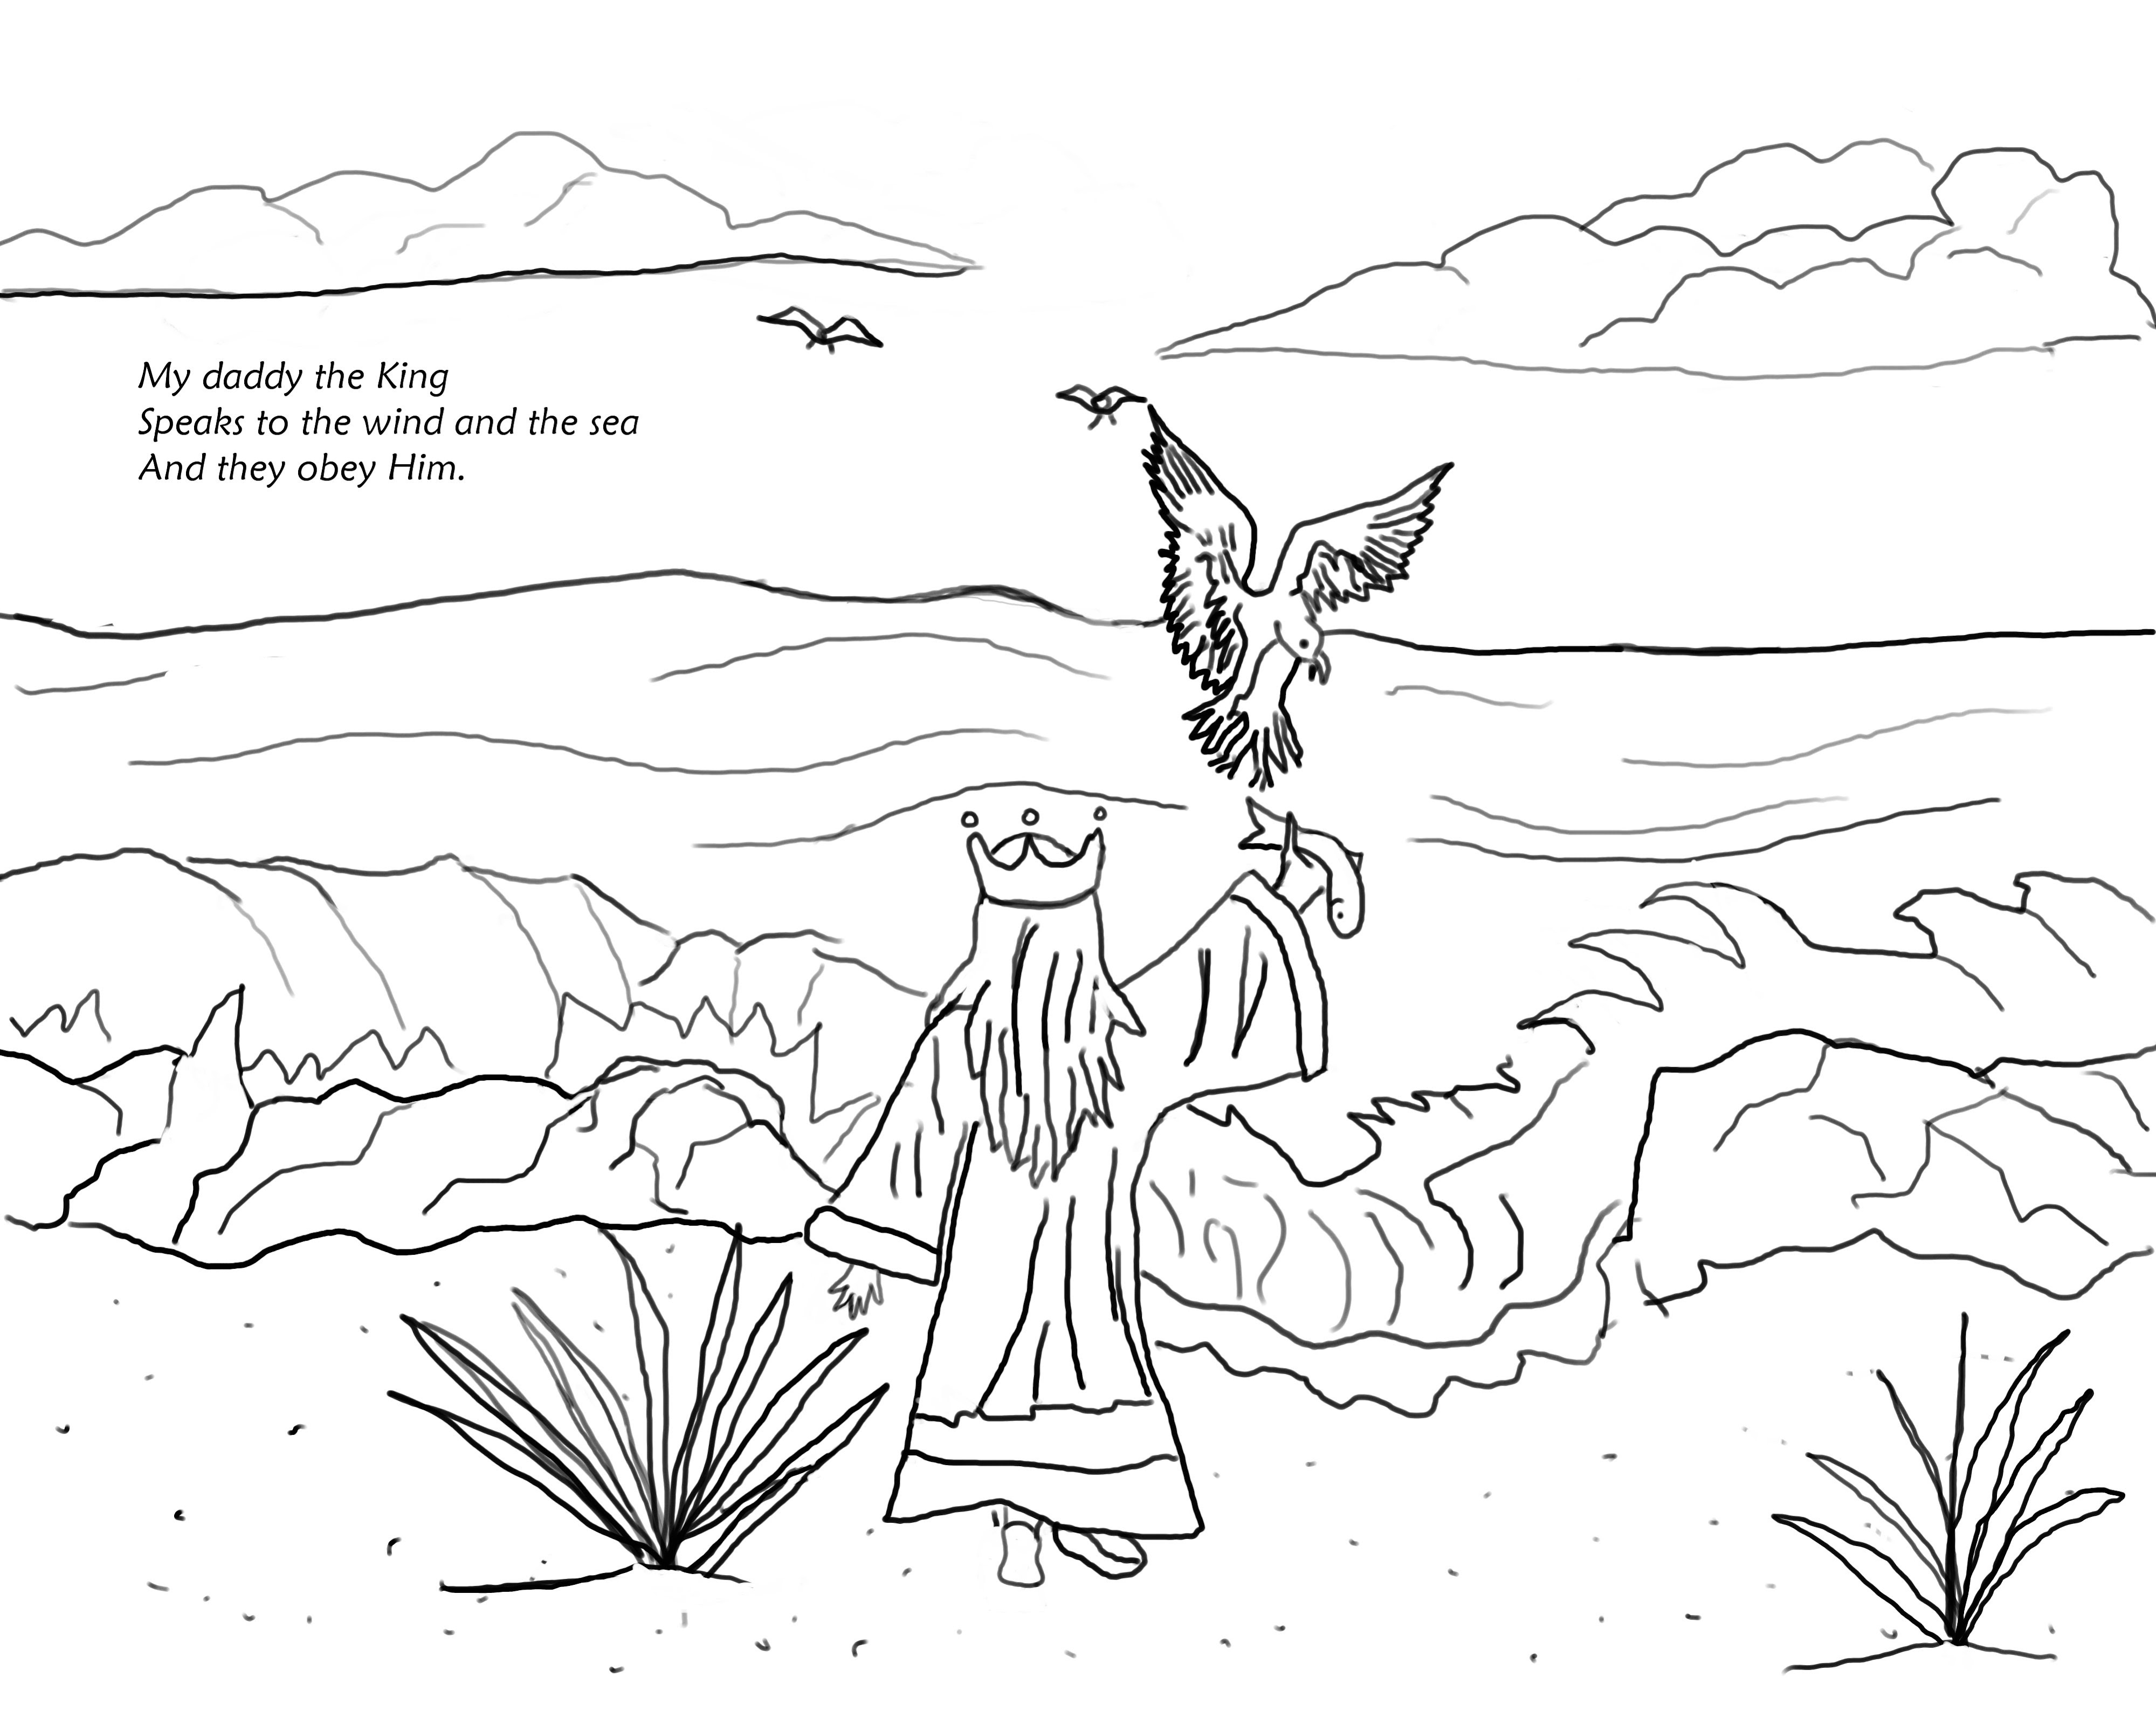 Free Coloring Pages. FREE STUFF! WOOHOO! title=